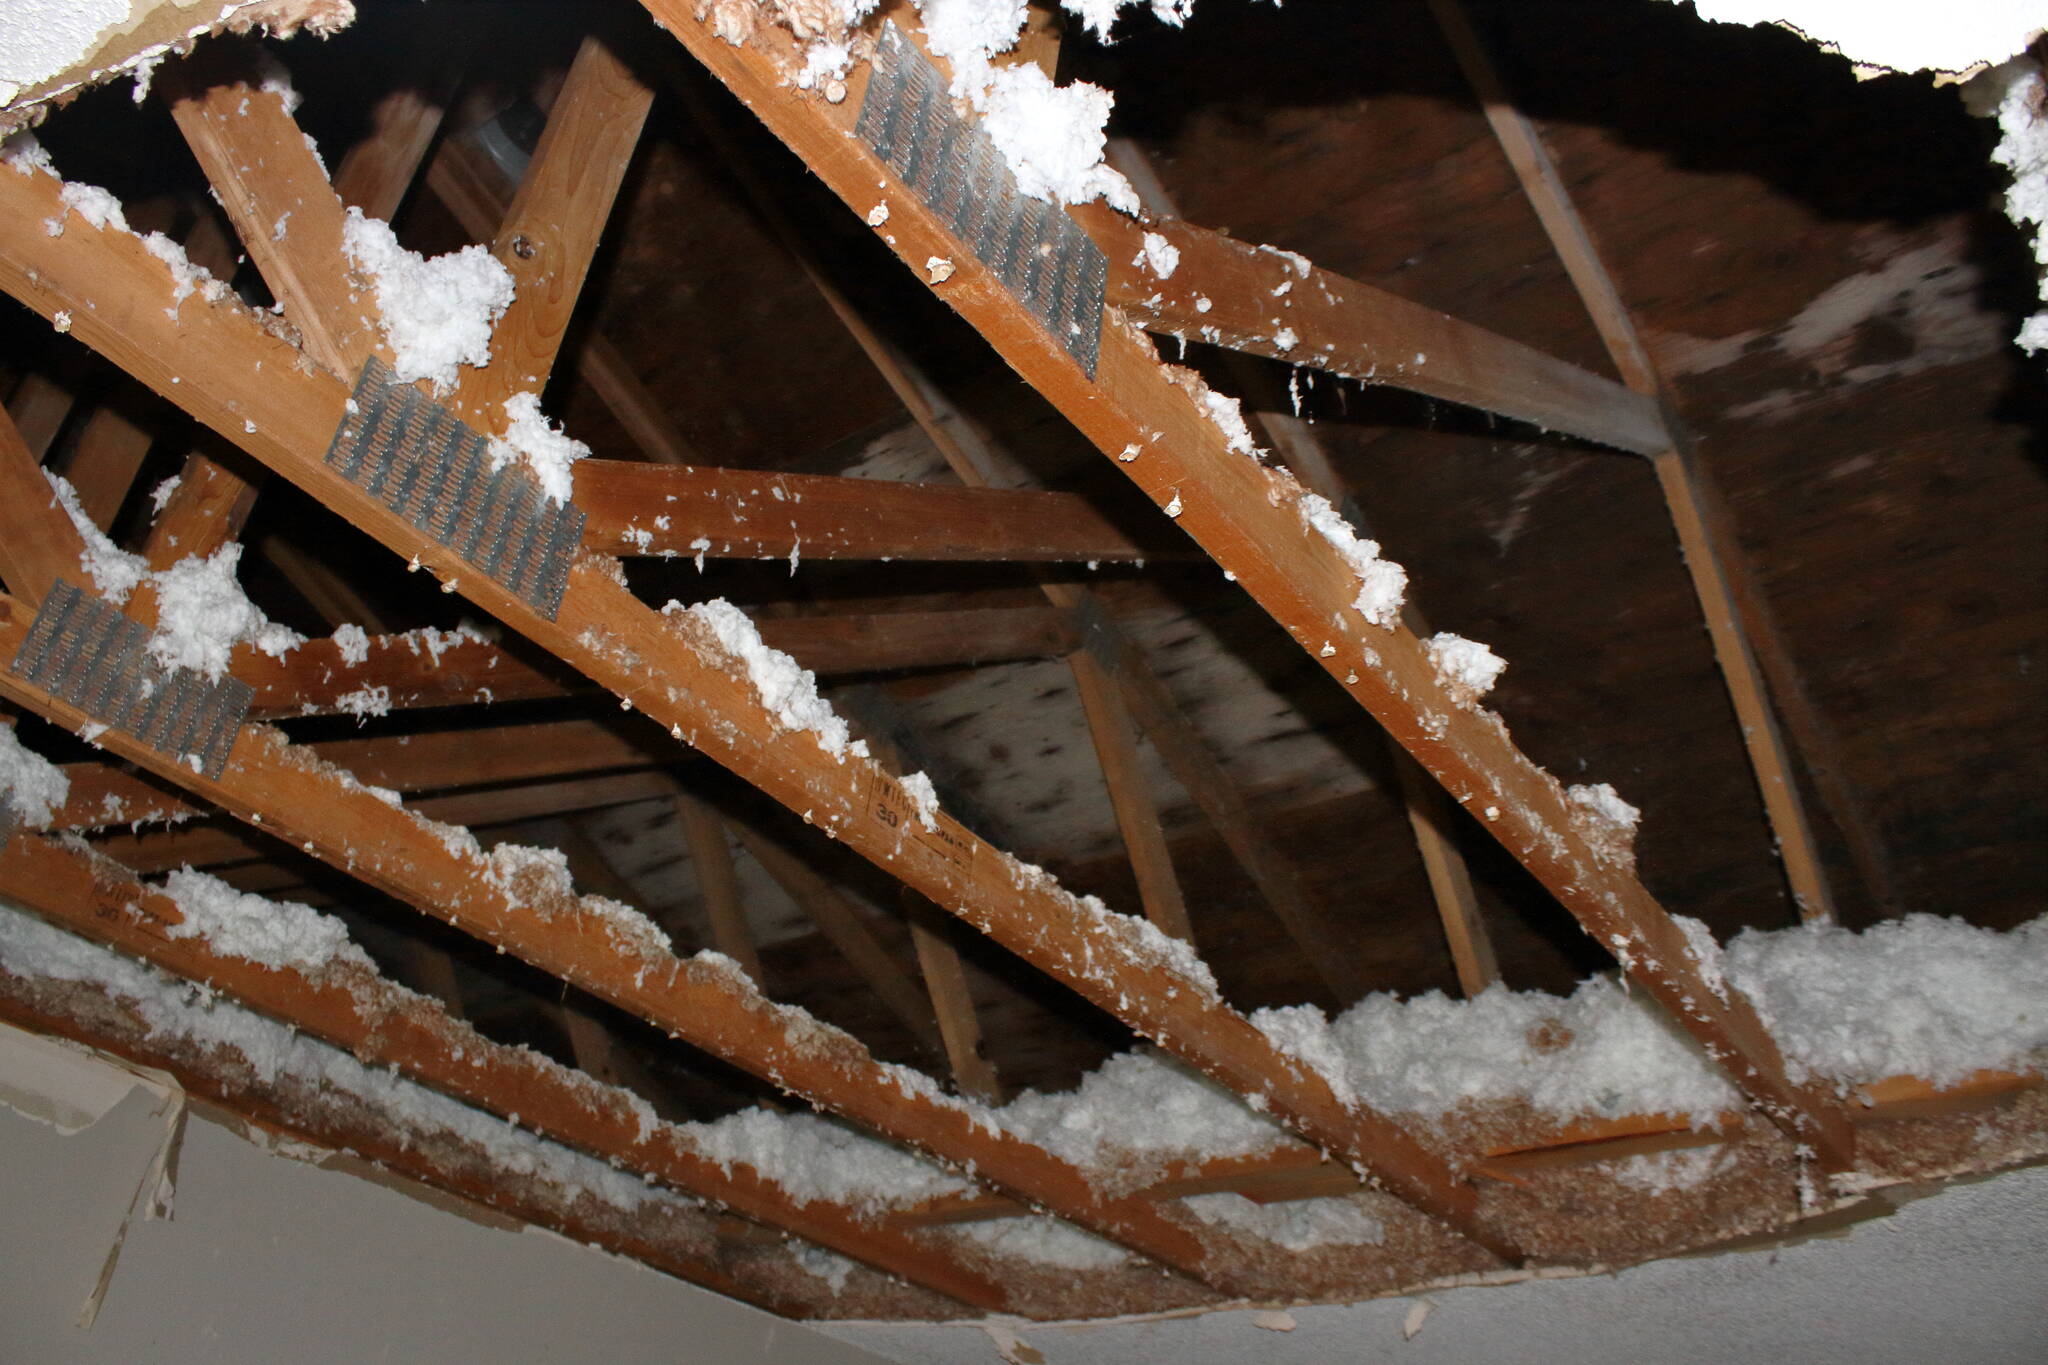 Exposed beams reveal the entirety of the roof after the ceiling fell in at an apartment in the Miro apartment complex. Photo by Keelin Everly-Lang / The Mirror